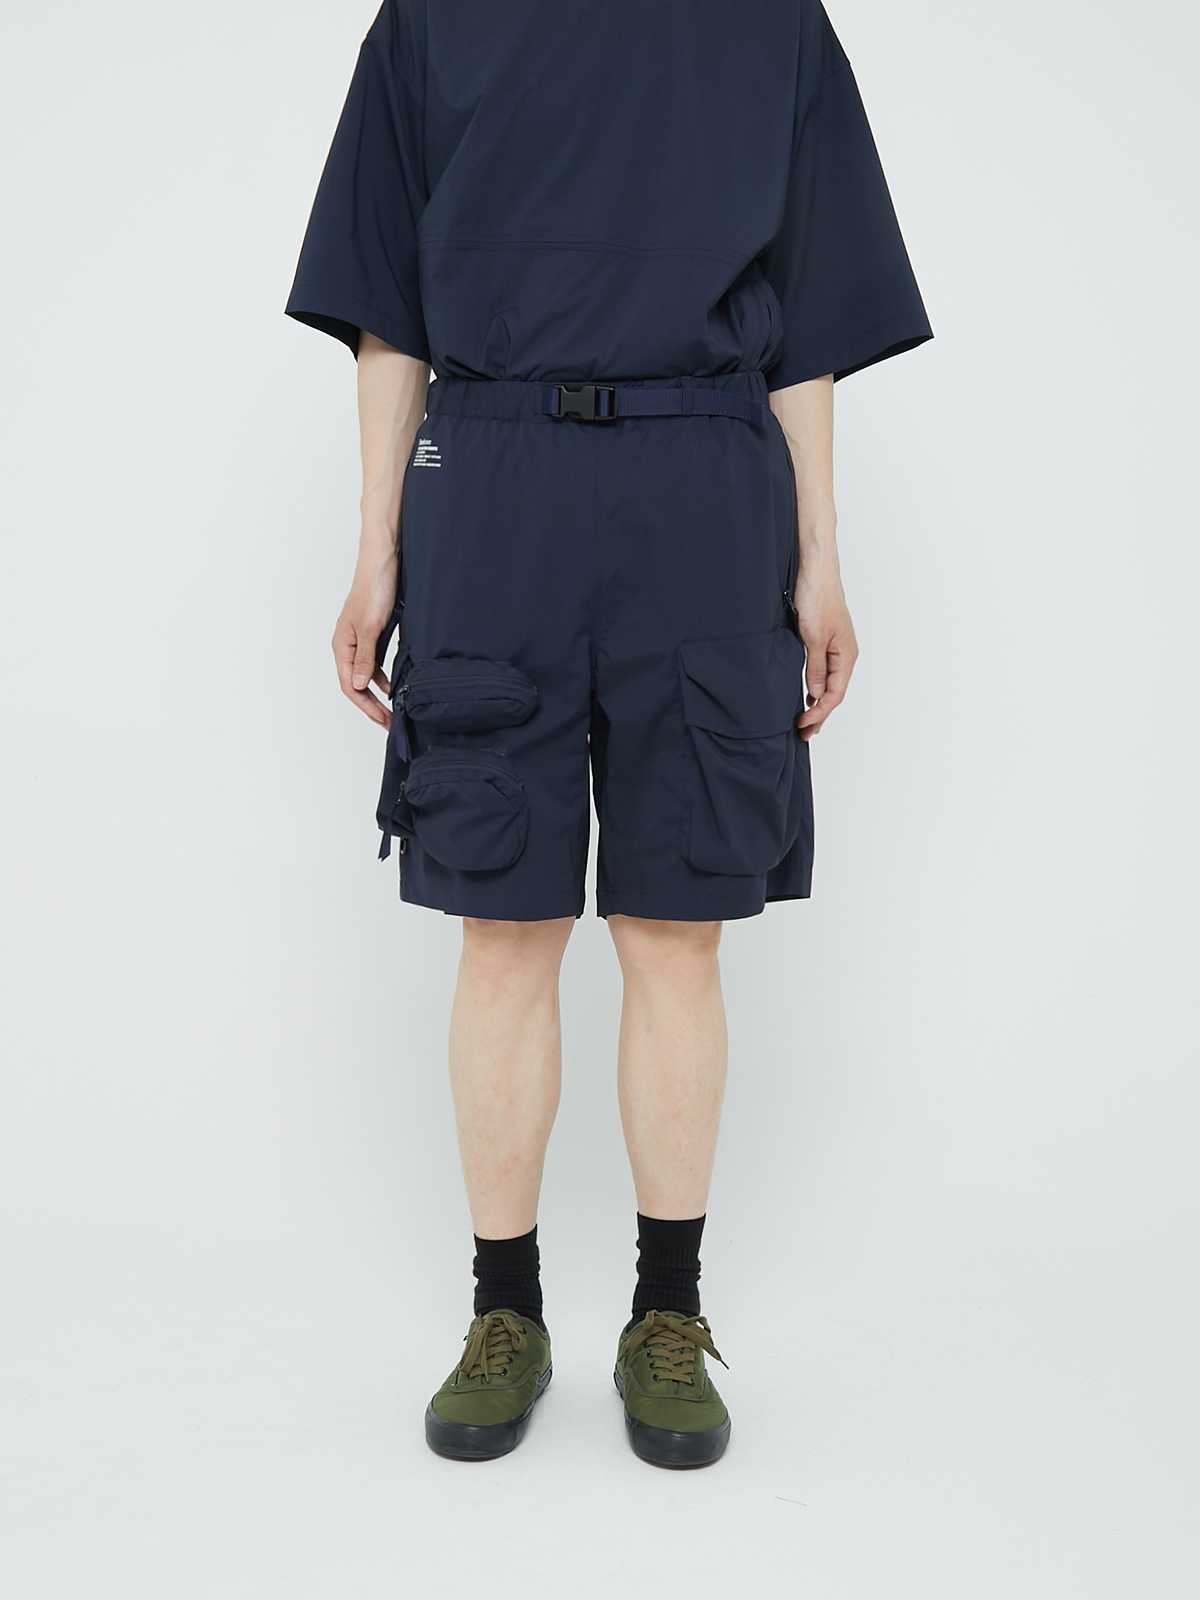 TECH WEATHER SHORTS (NAVY)